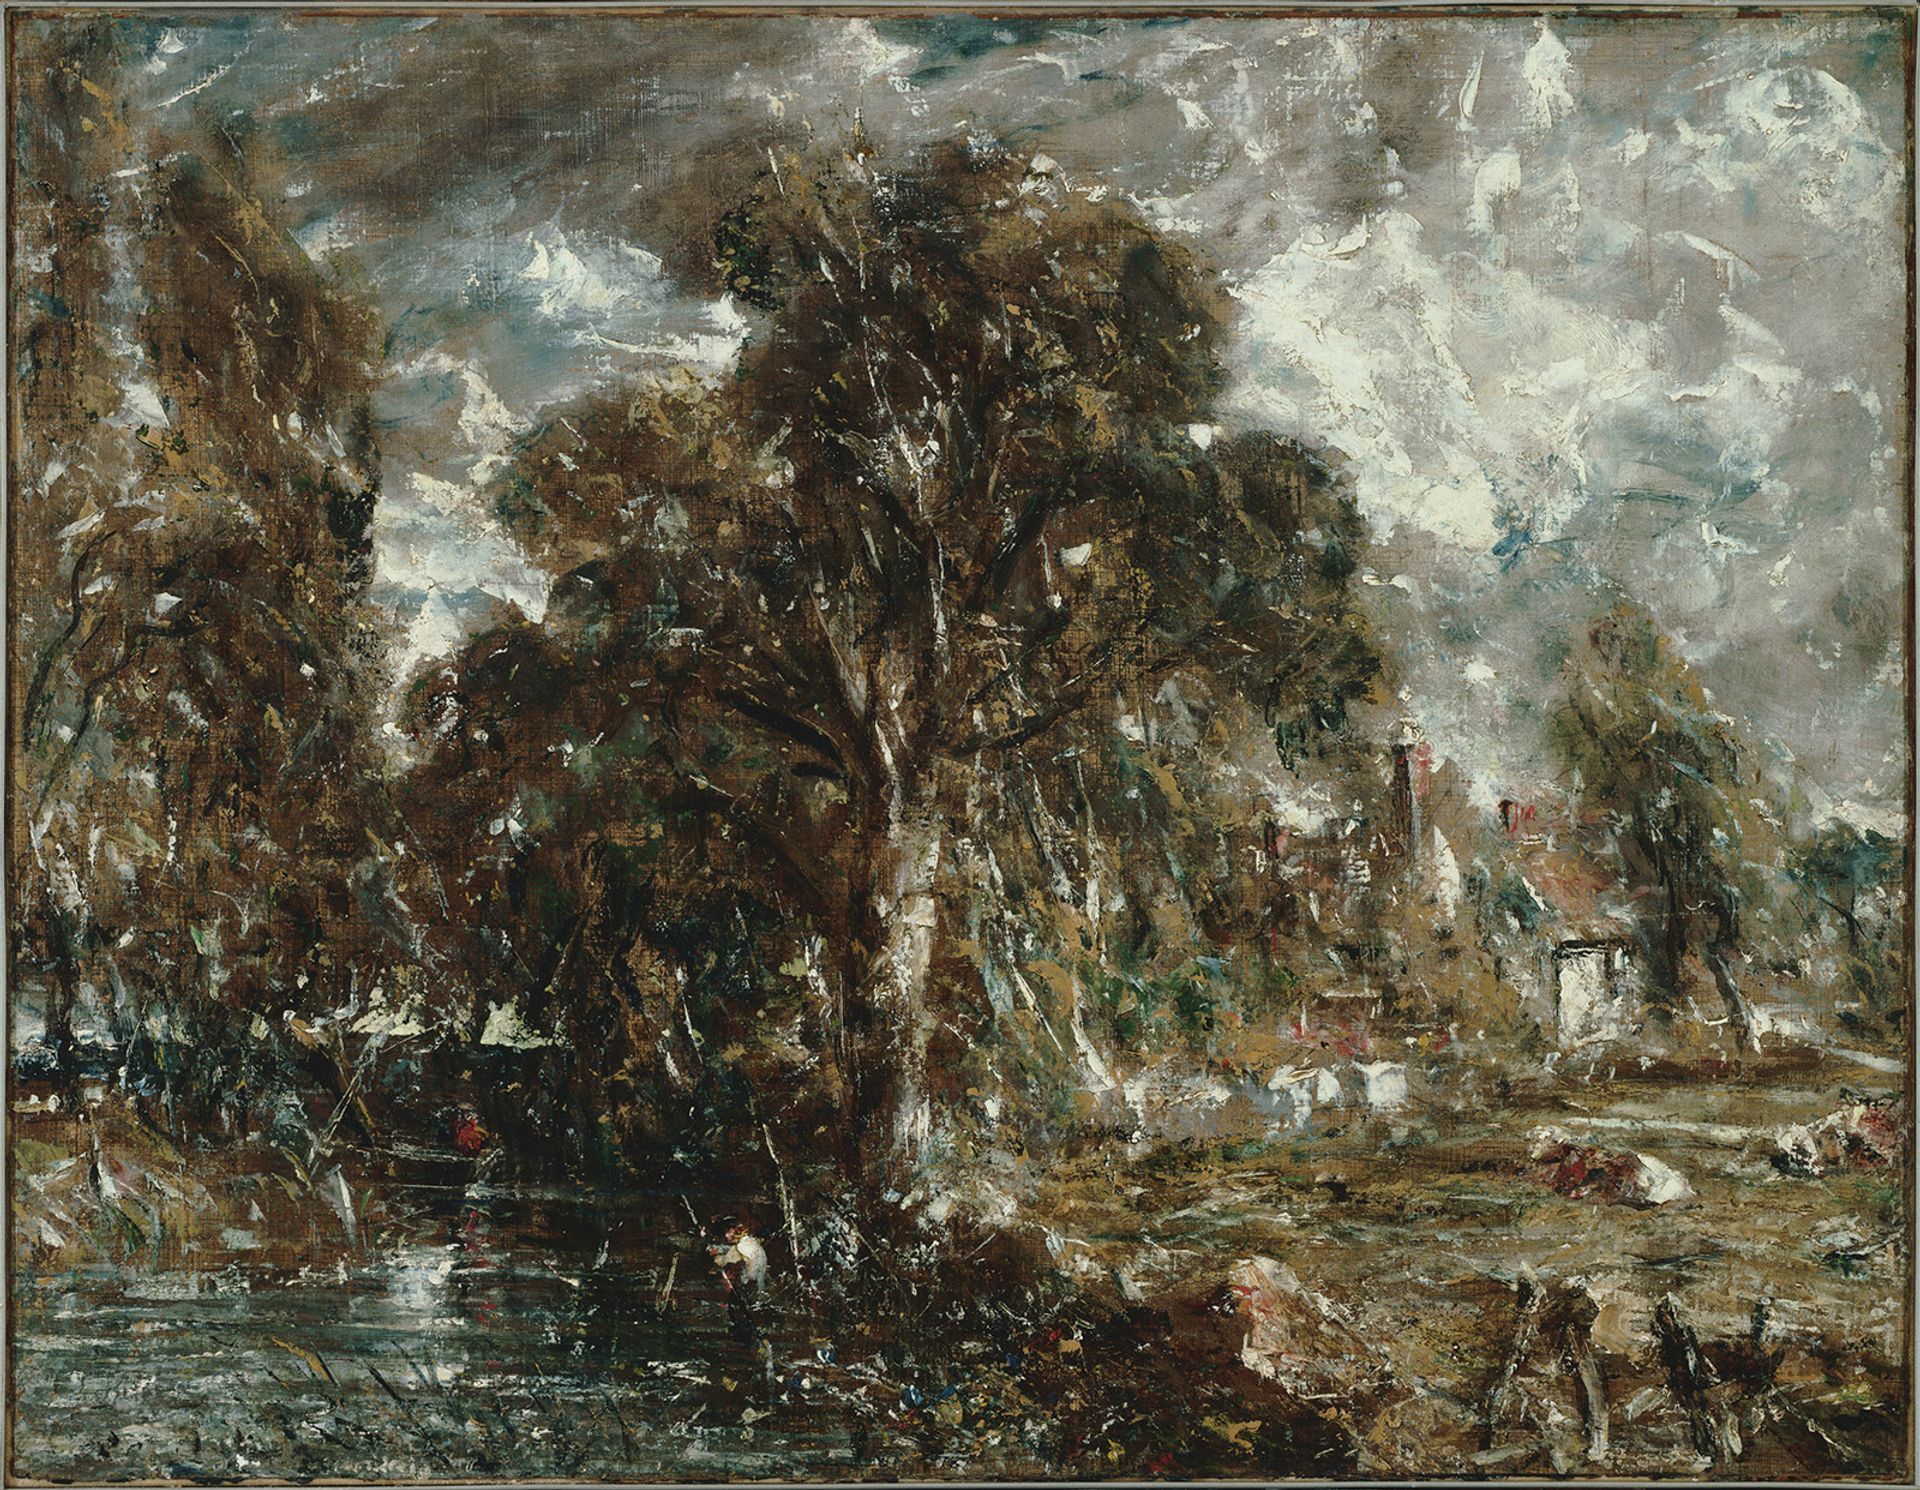 Constable’s On the River Stour (around 1834-37) shows a more expressive style than his earlier works © The Phillips Collection, Washington DC